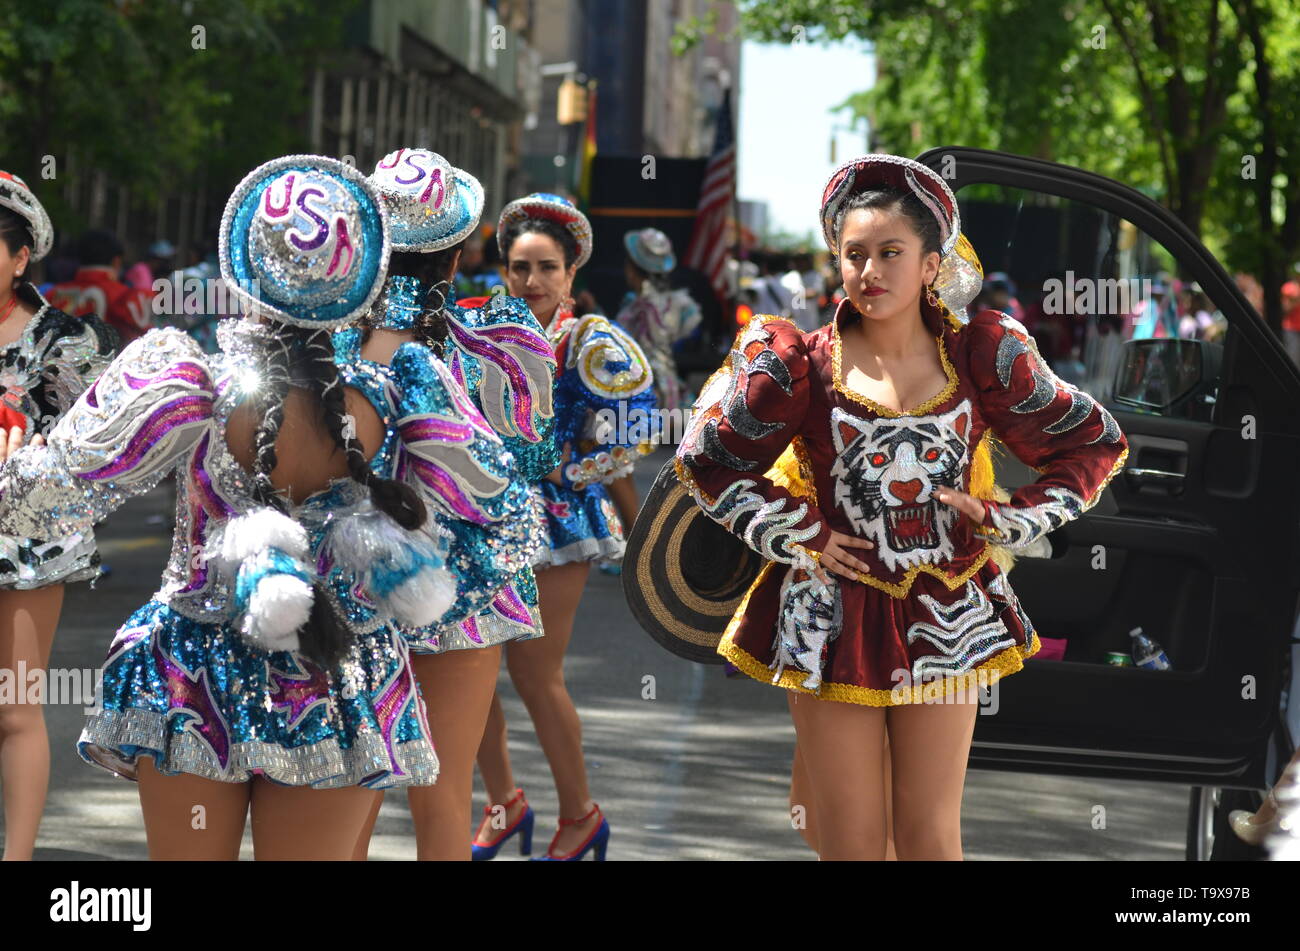 Thousands of people participated in the annual Dance Parade along Broadway in New York City on May 18, 2019. Stock Photo